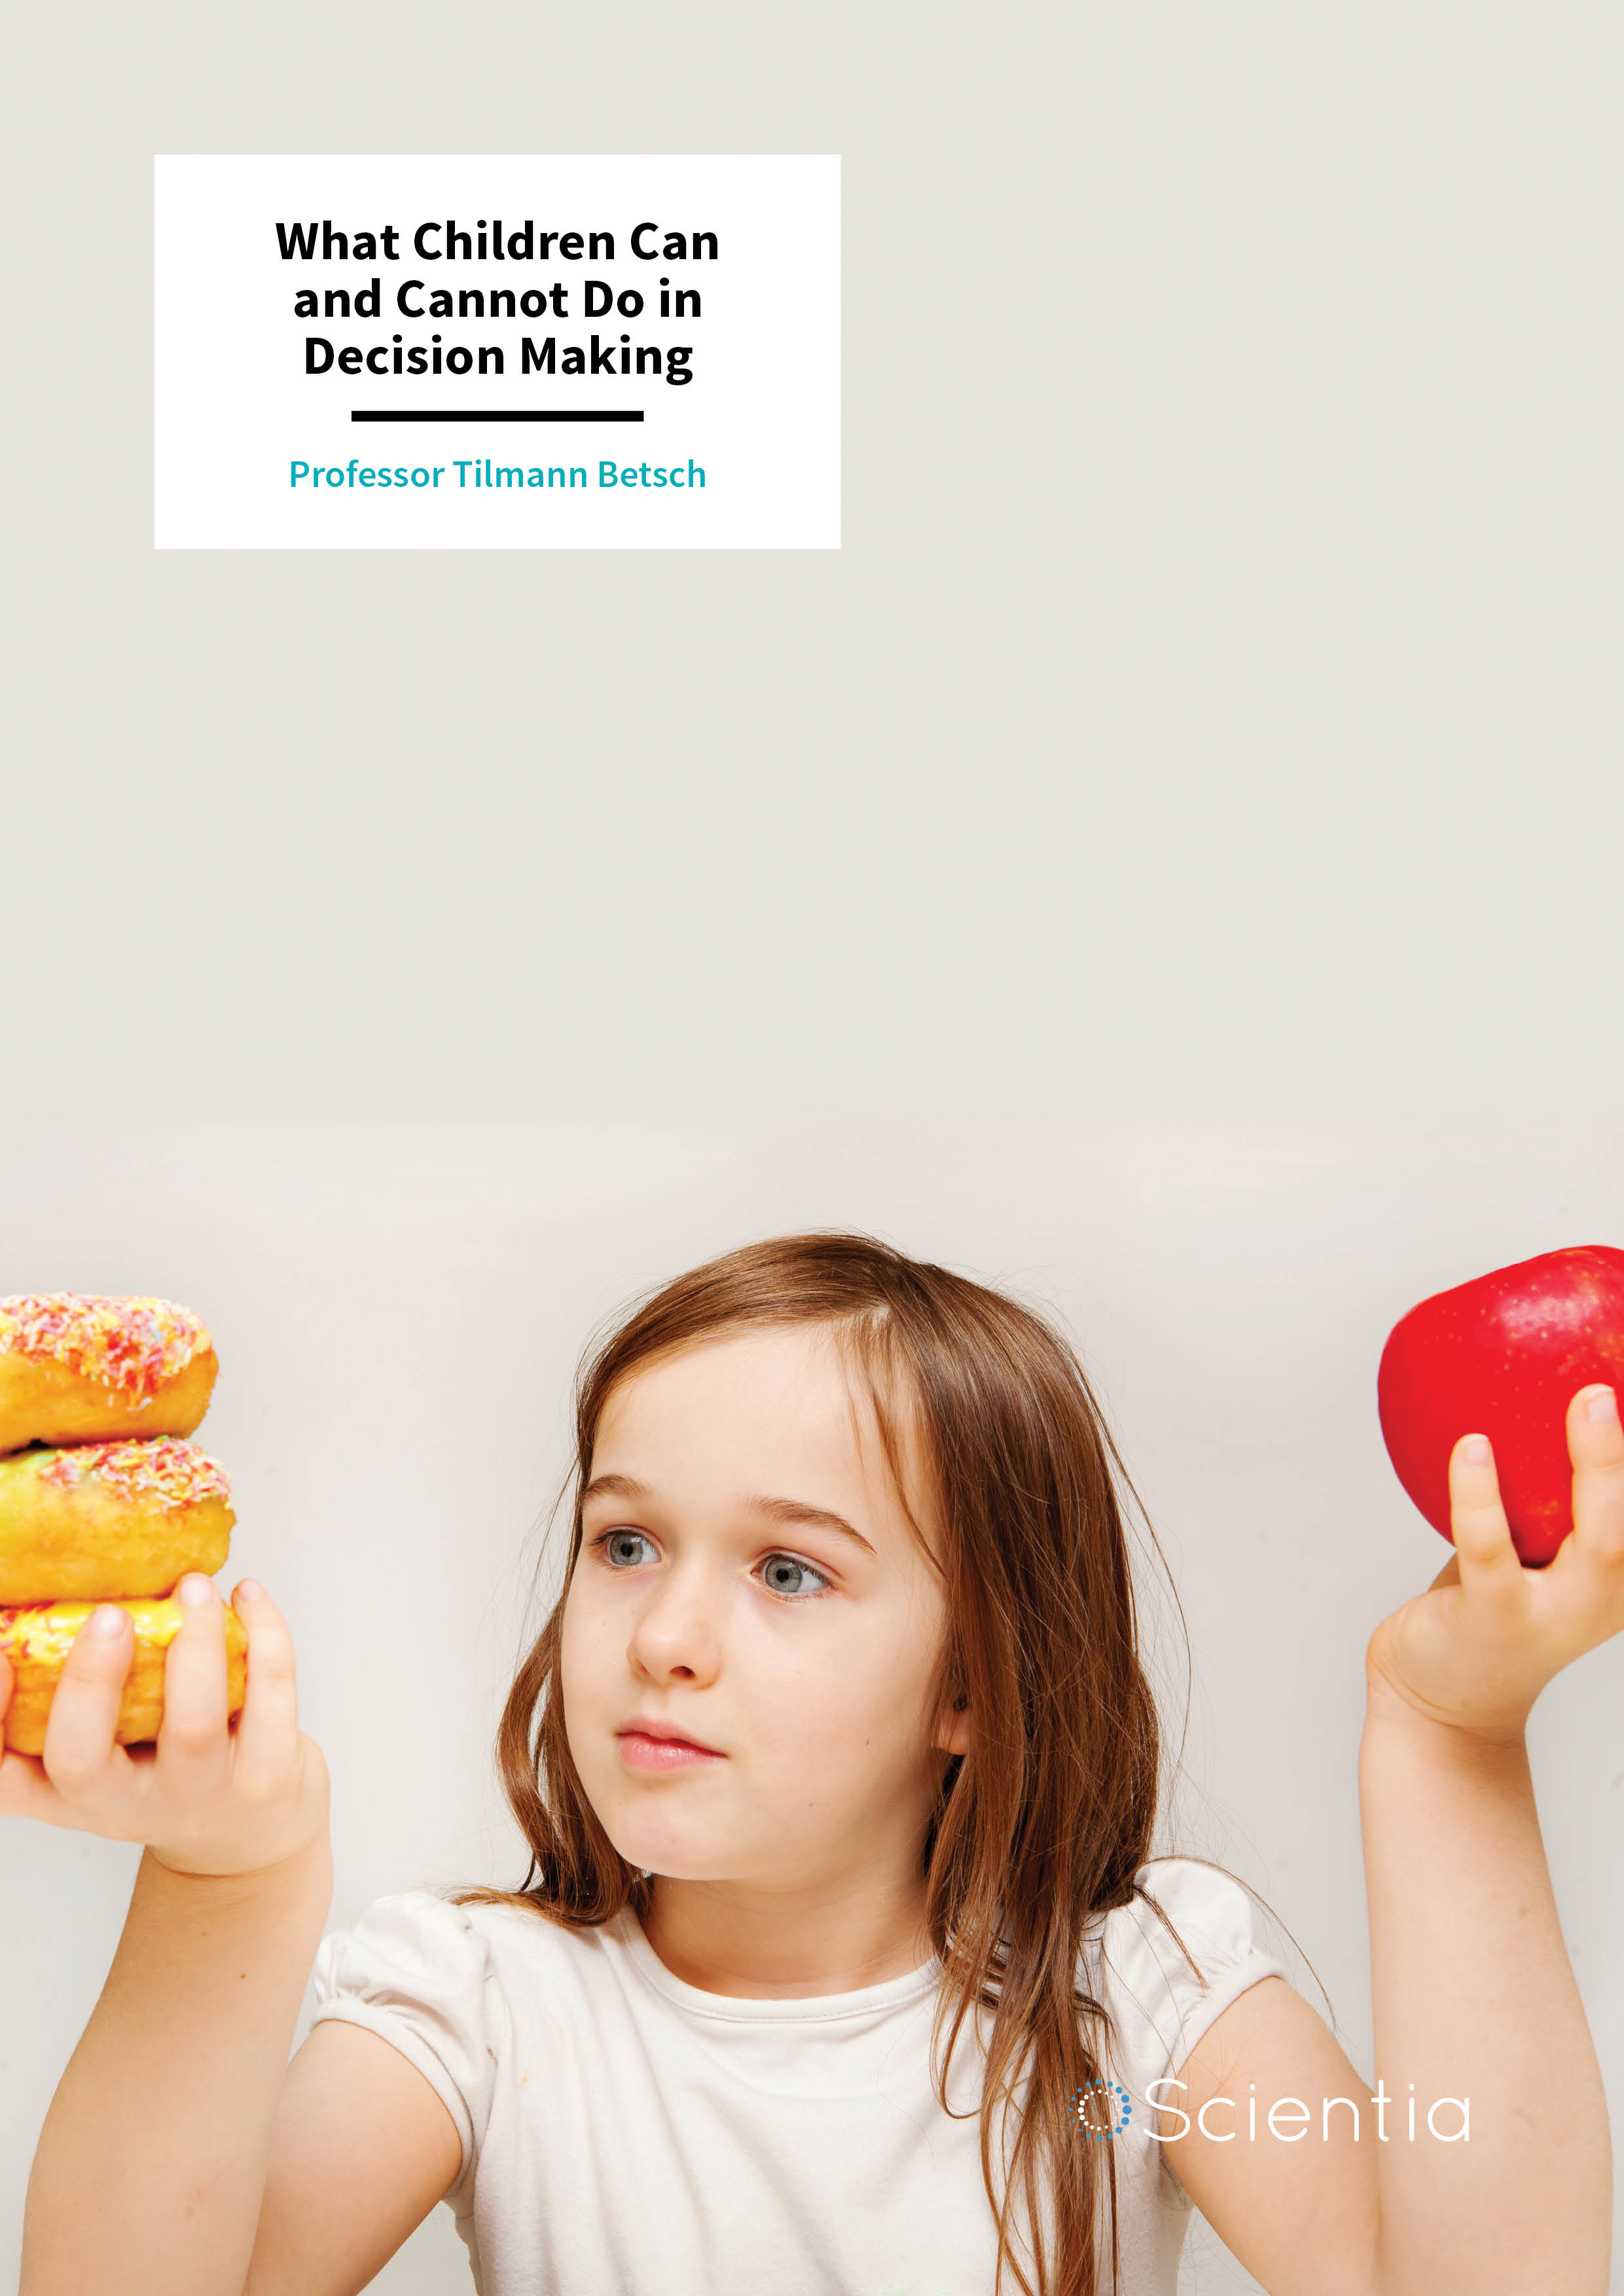 childrens participation in decision making